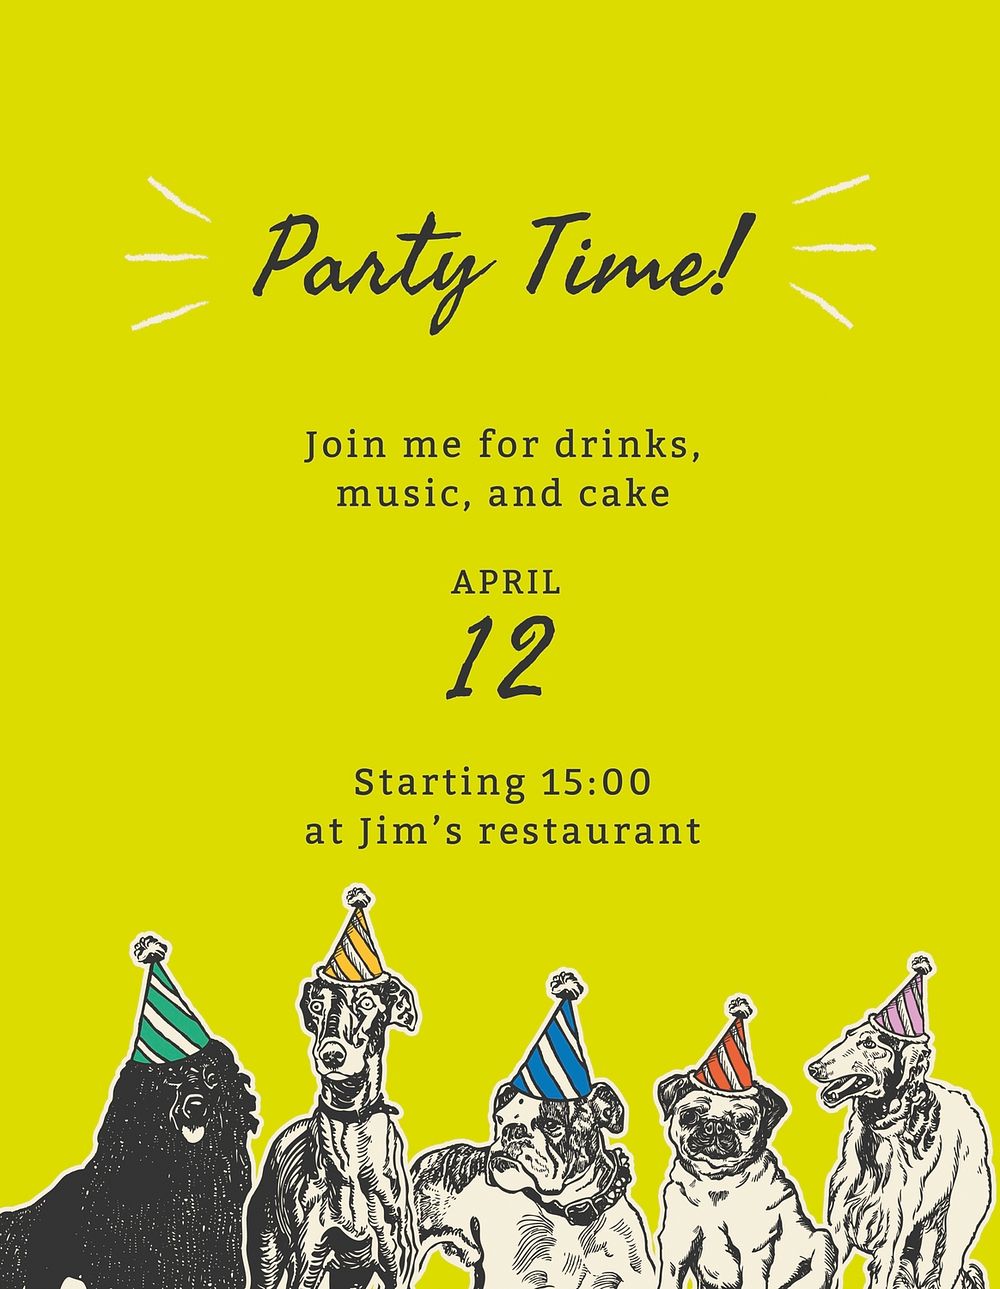 Editable party flyer template psd with quote, party time, remixed from artworks by Moriz Jung